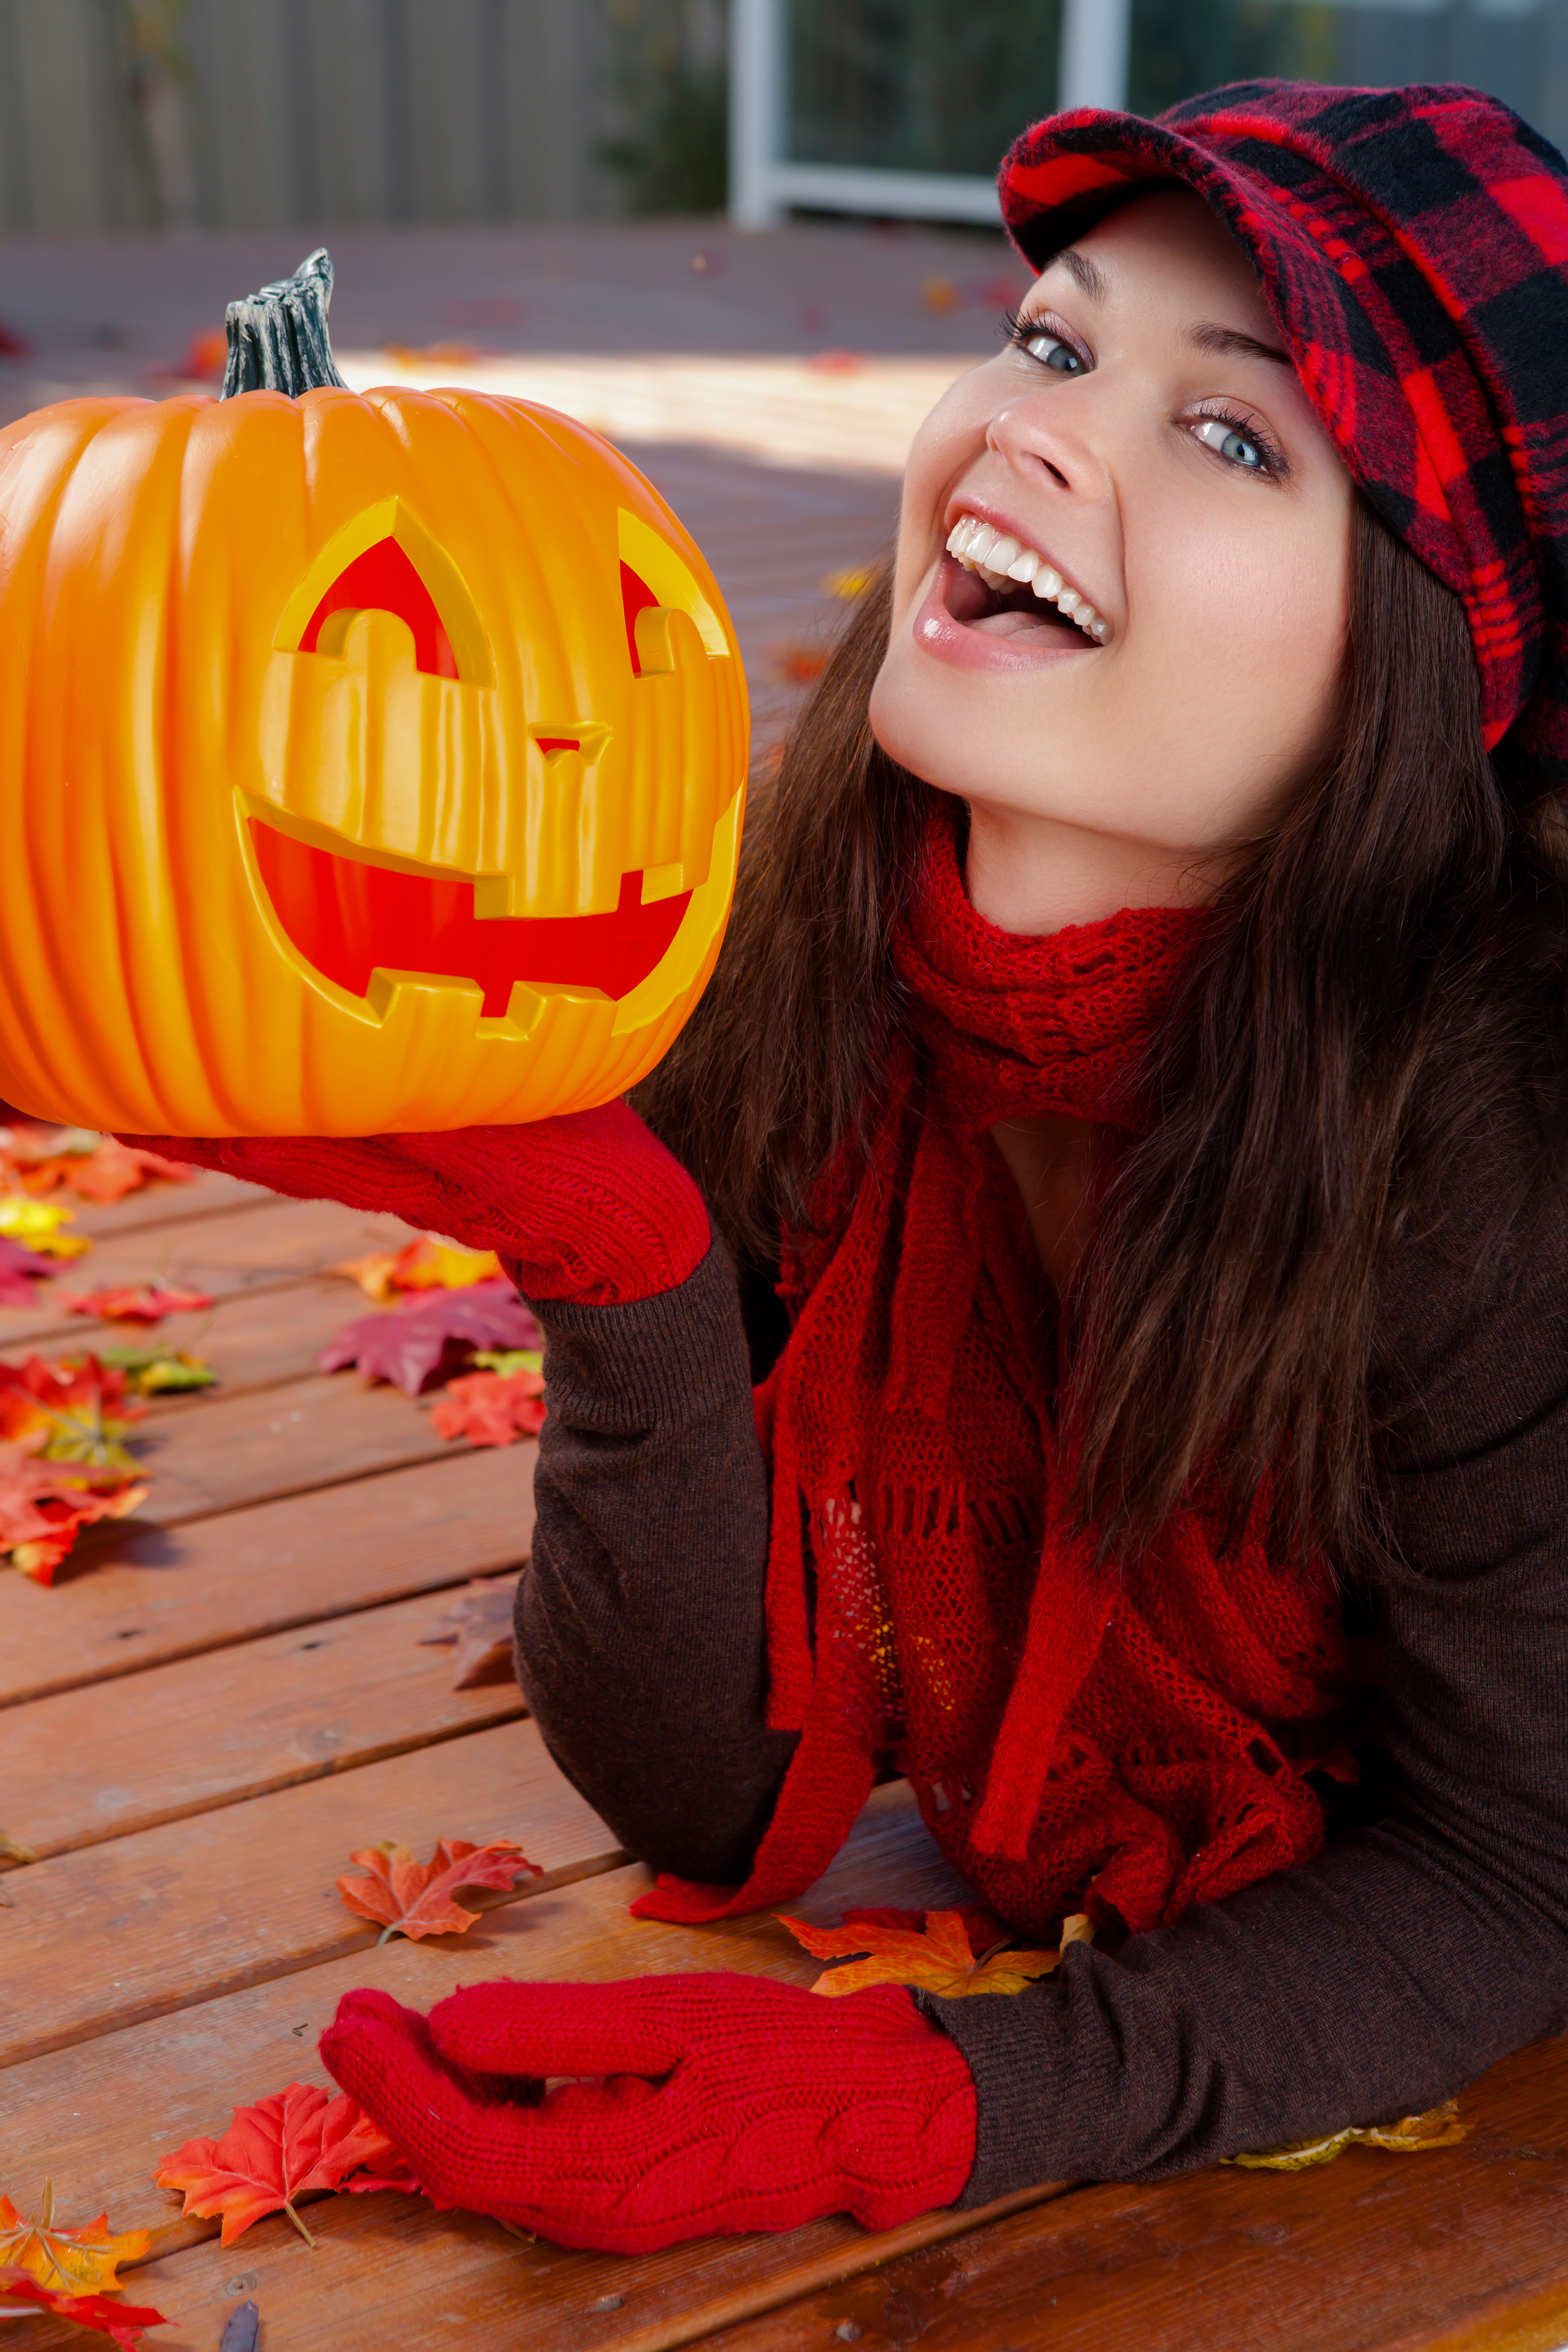 A woman posing with a pumpkin